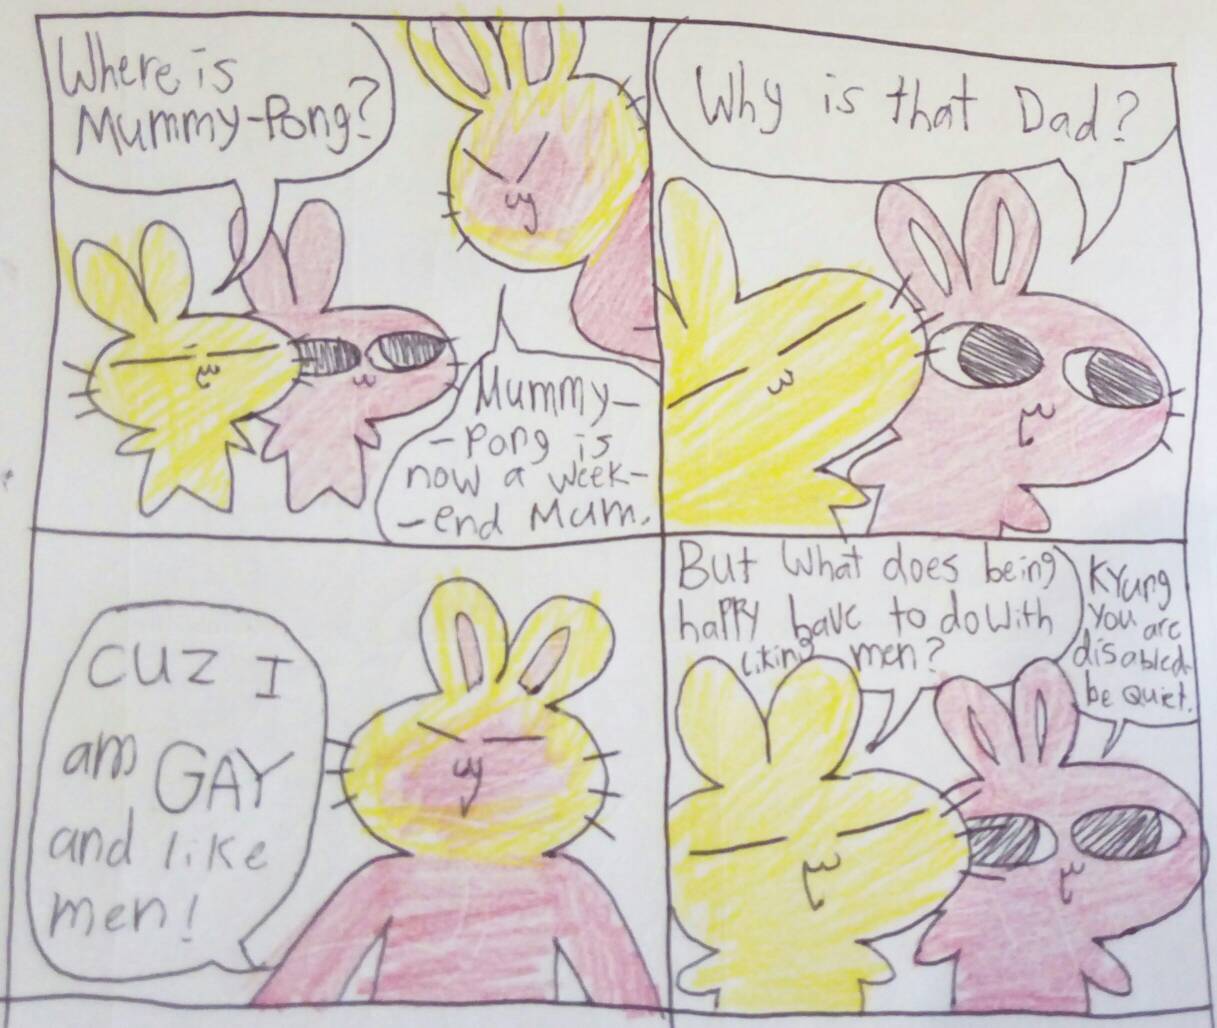 A comic about two rabbits, Kyung and Jangmi, and their dad Marmalade. Kyung: 'Where is Mummy-Pong?' Marmalade: 'Mummy-Pong is now a weekend mum.' Jangmi: 'Why is that dad?' Marmalade: 'Cuz I am GAY and like men!' Kyung: 'But what does being happy have to do with liking men?' Jangmi: 'Kyung you are disabled be quiet.'